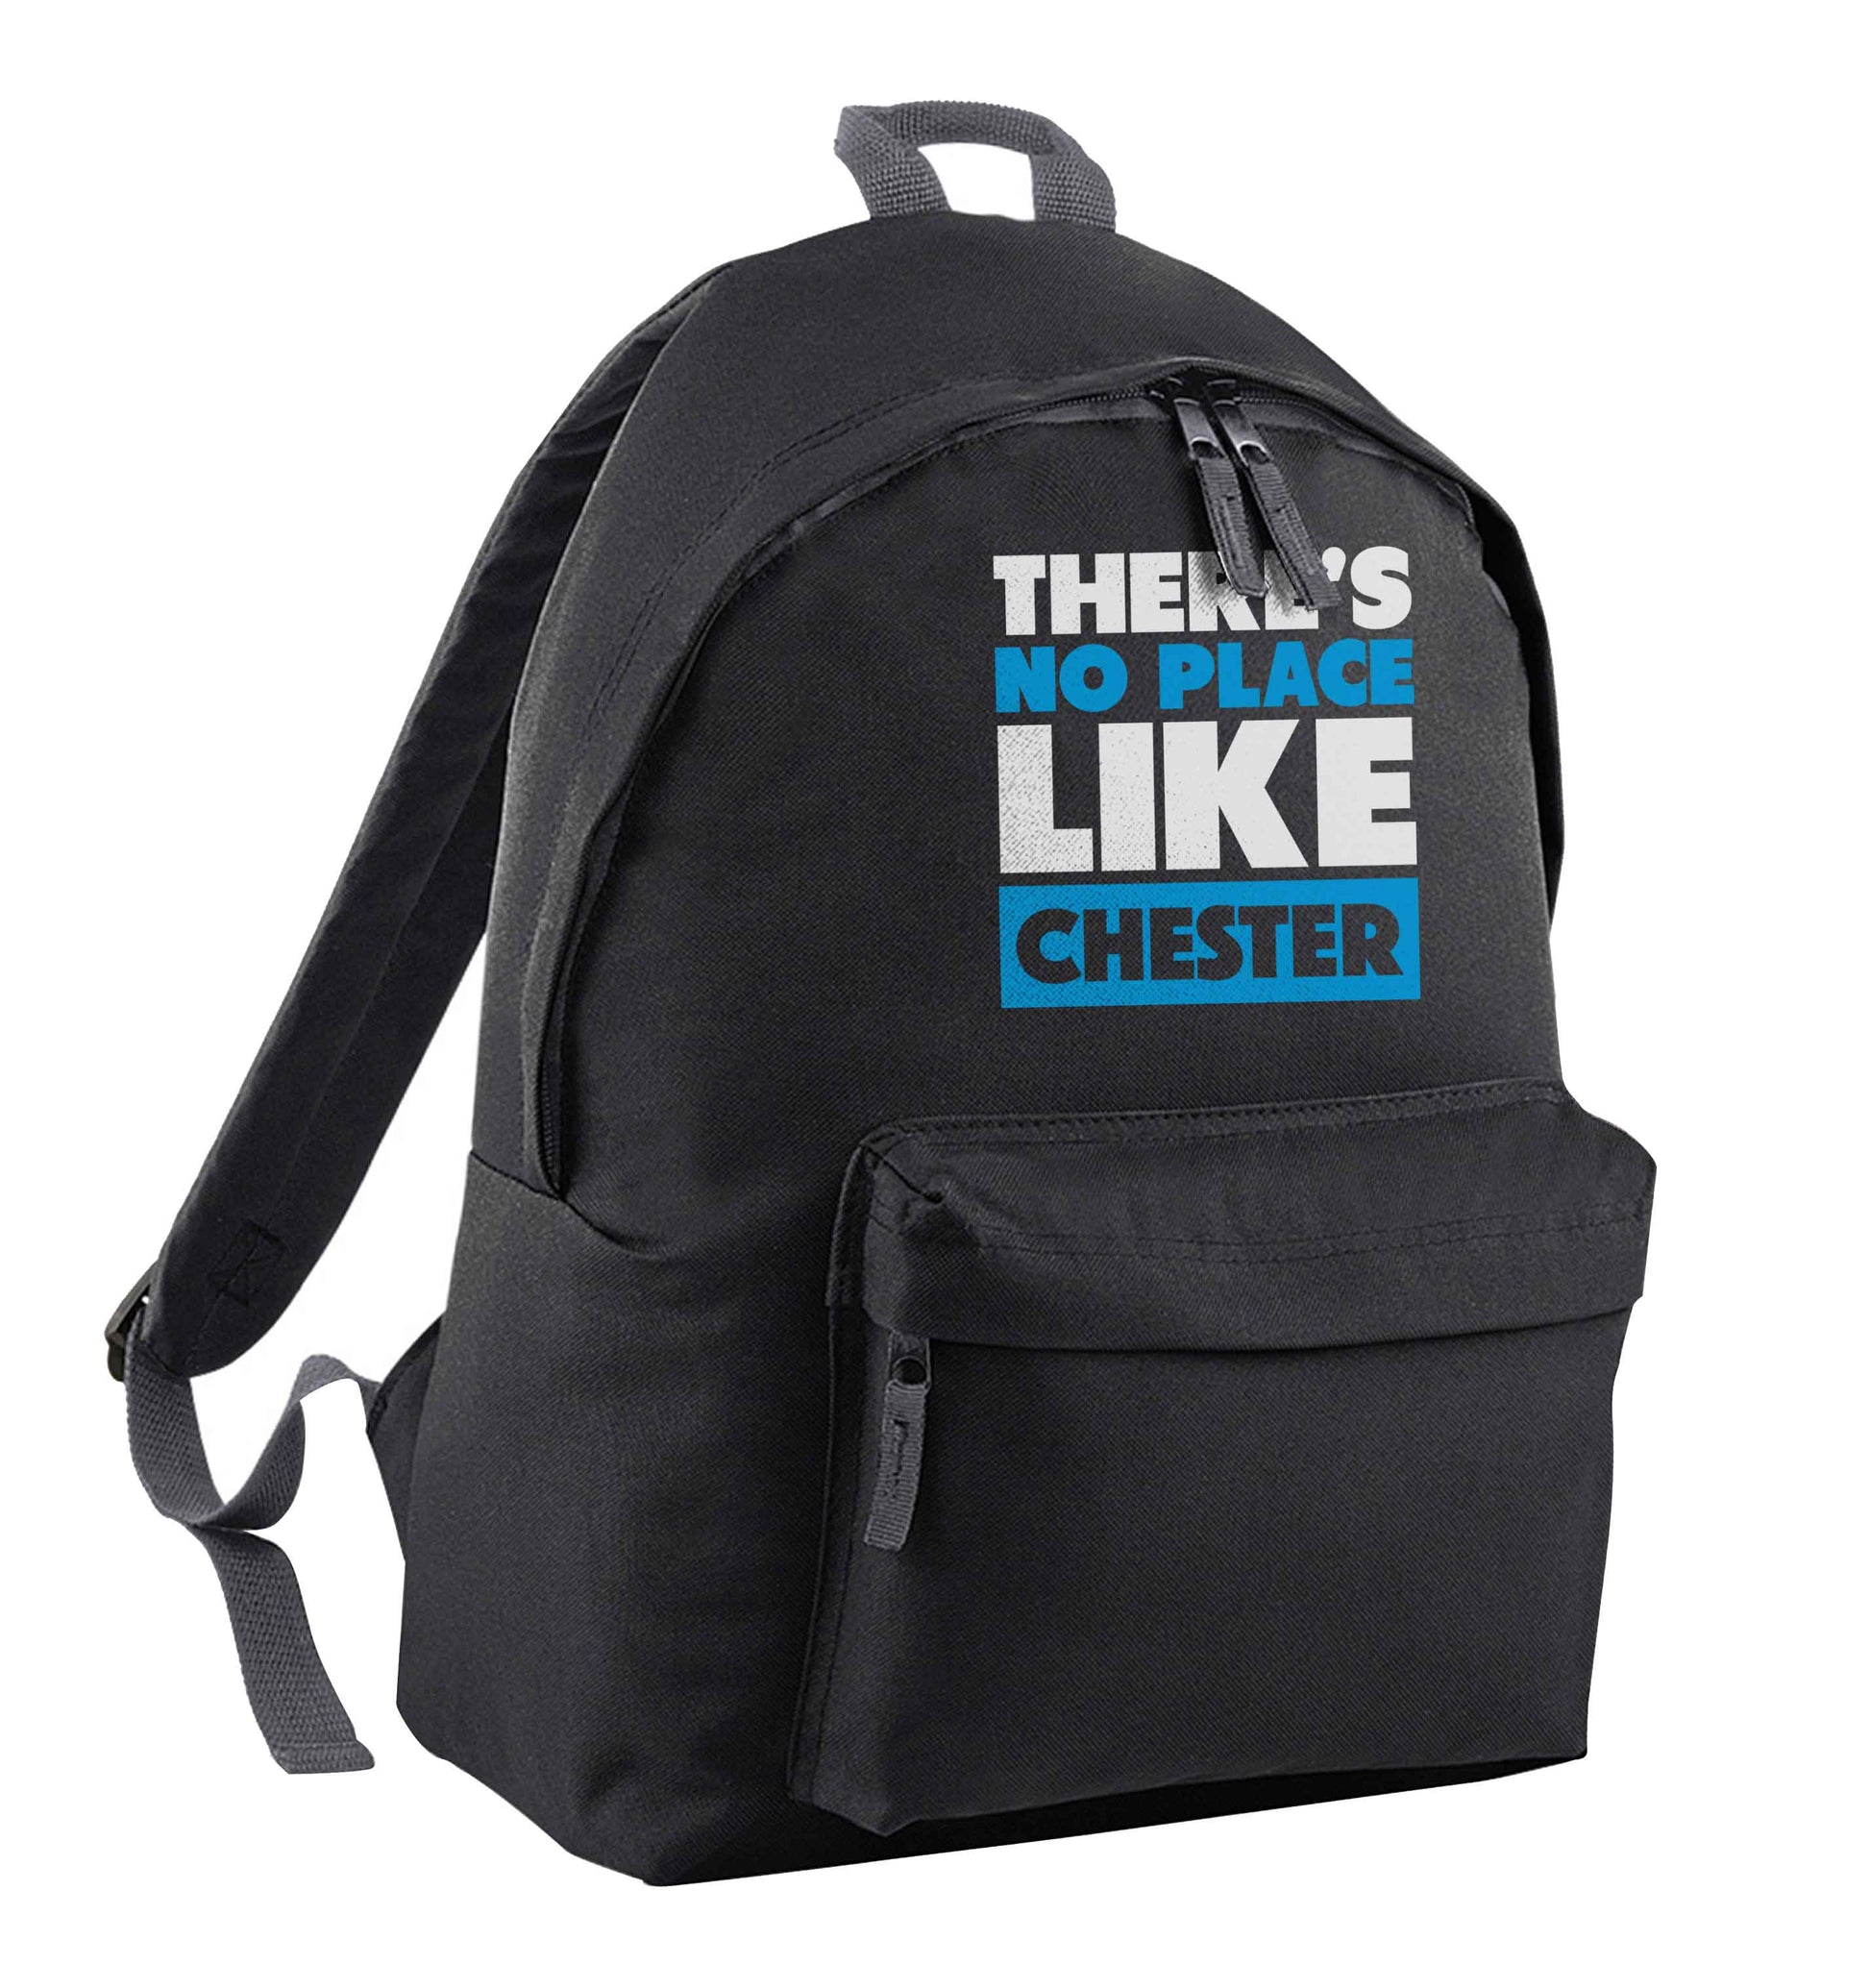 There's no place like Chester black adults backpack